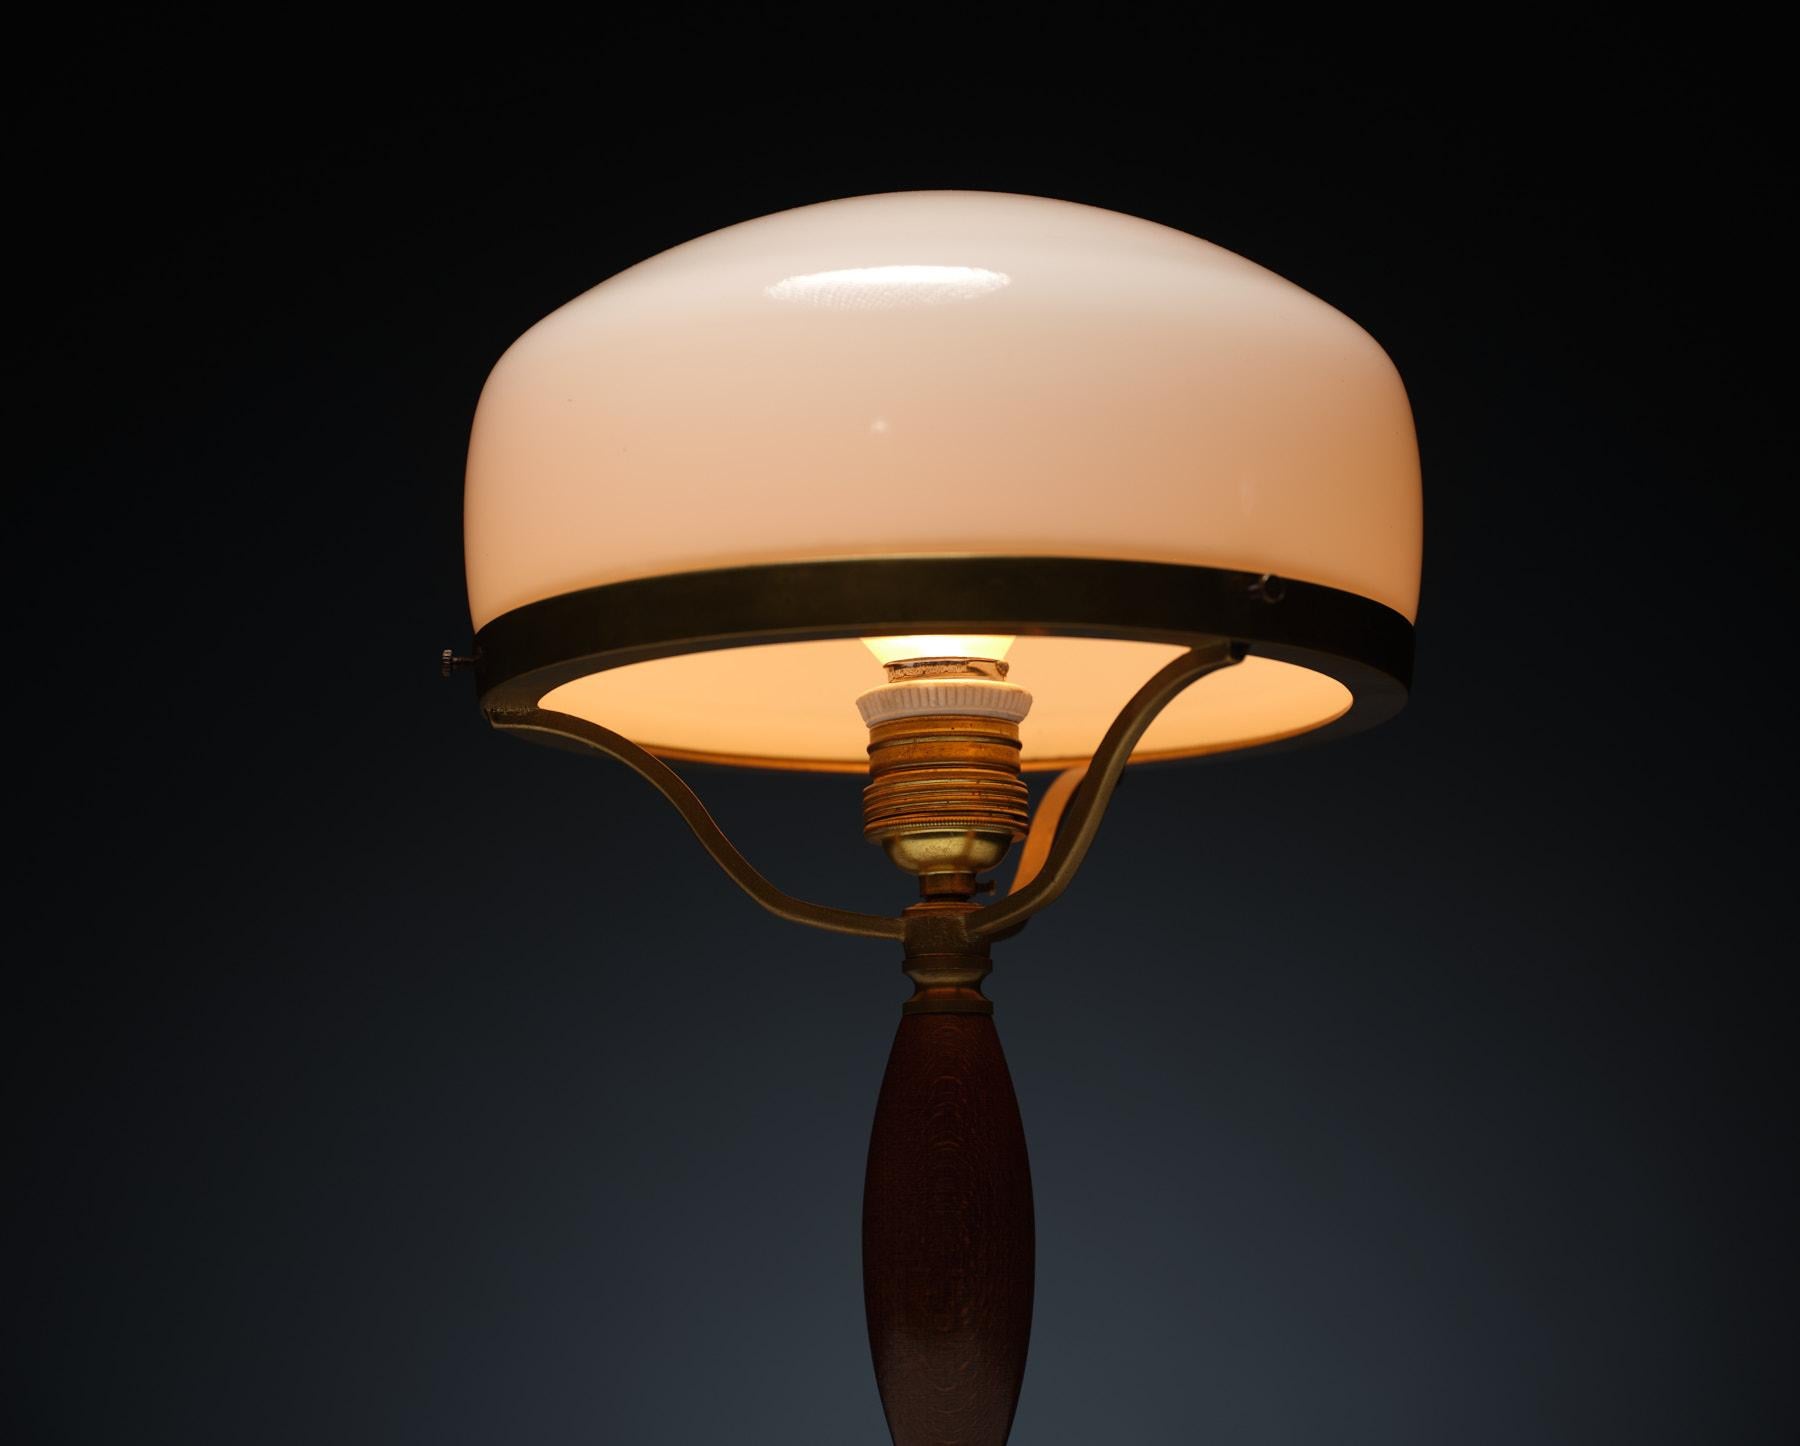 Introducing our exquisite vintage table lamp that effortlessly embodies midcentury charm and timeless elegance. Crafted from lustrous brass with its original patina, this lamp exudes a sense of precious history. The rich, dark-stained beechwood base